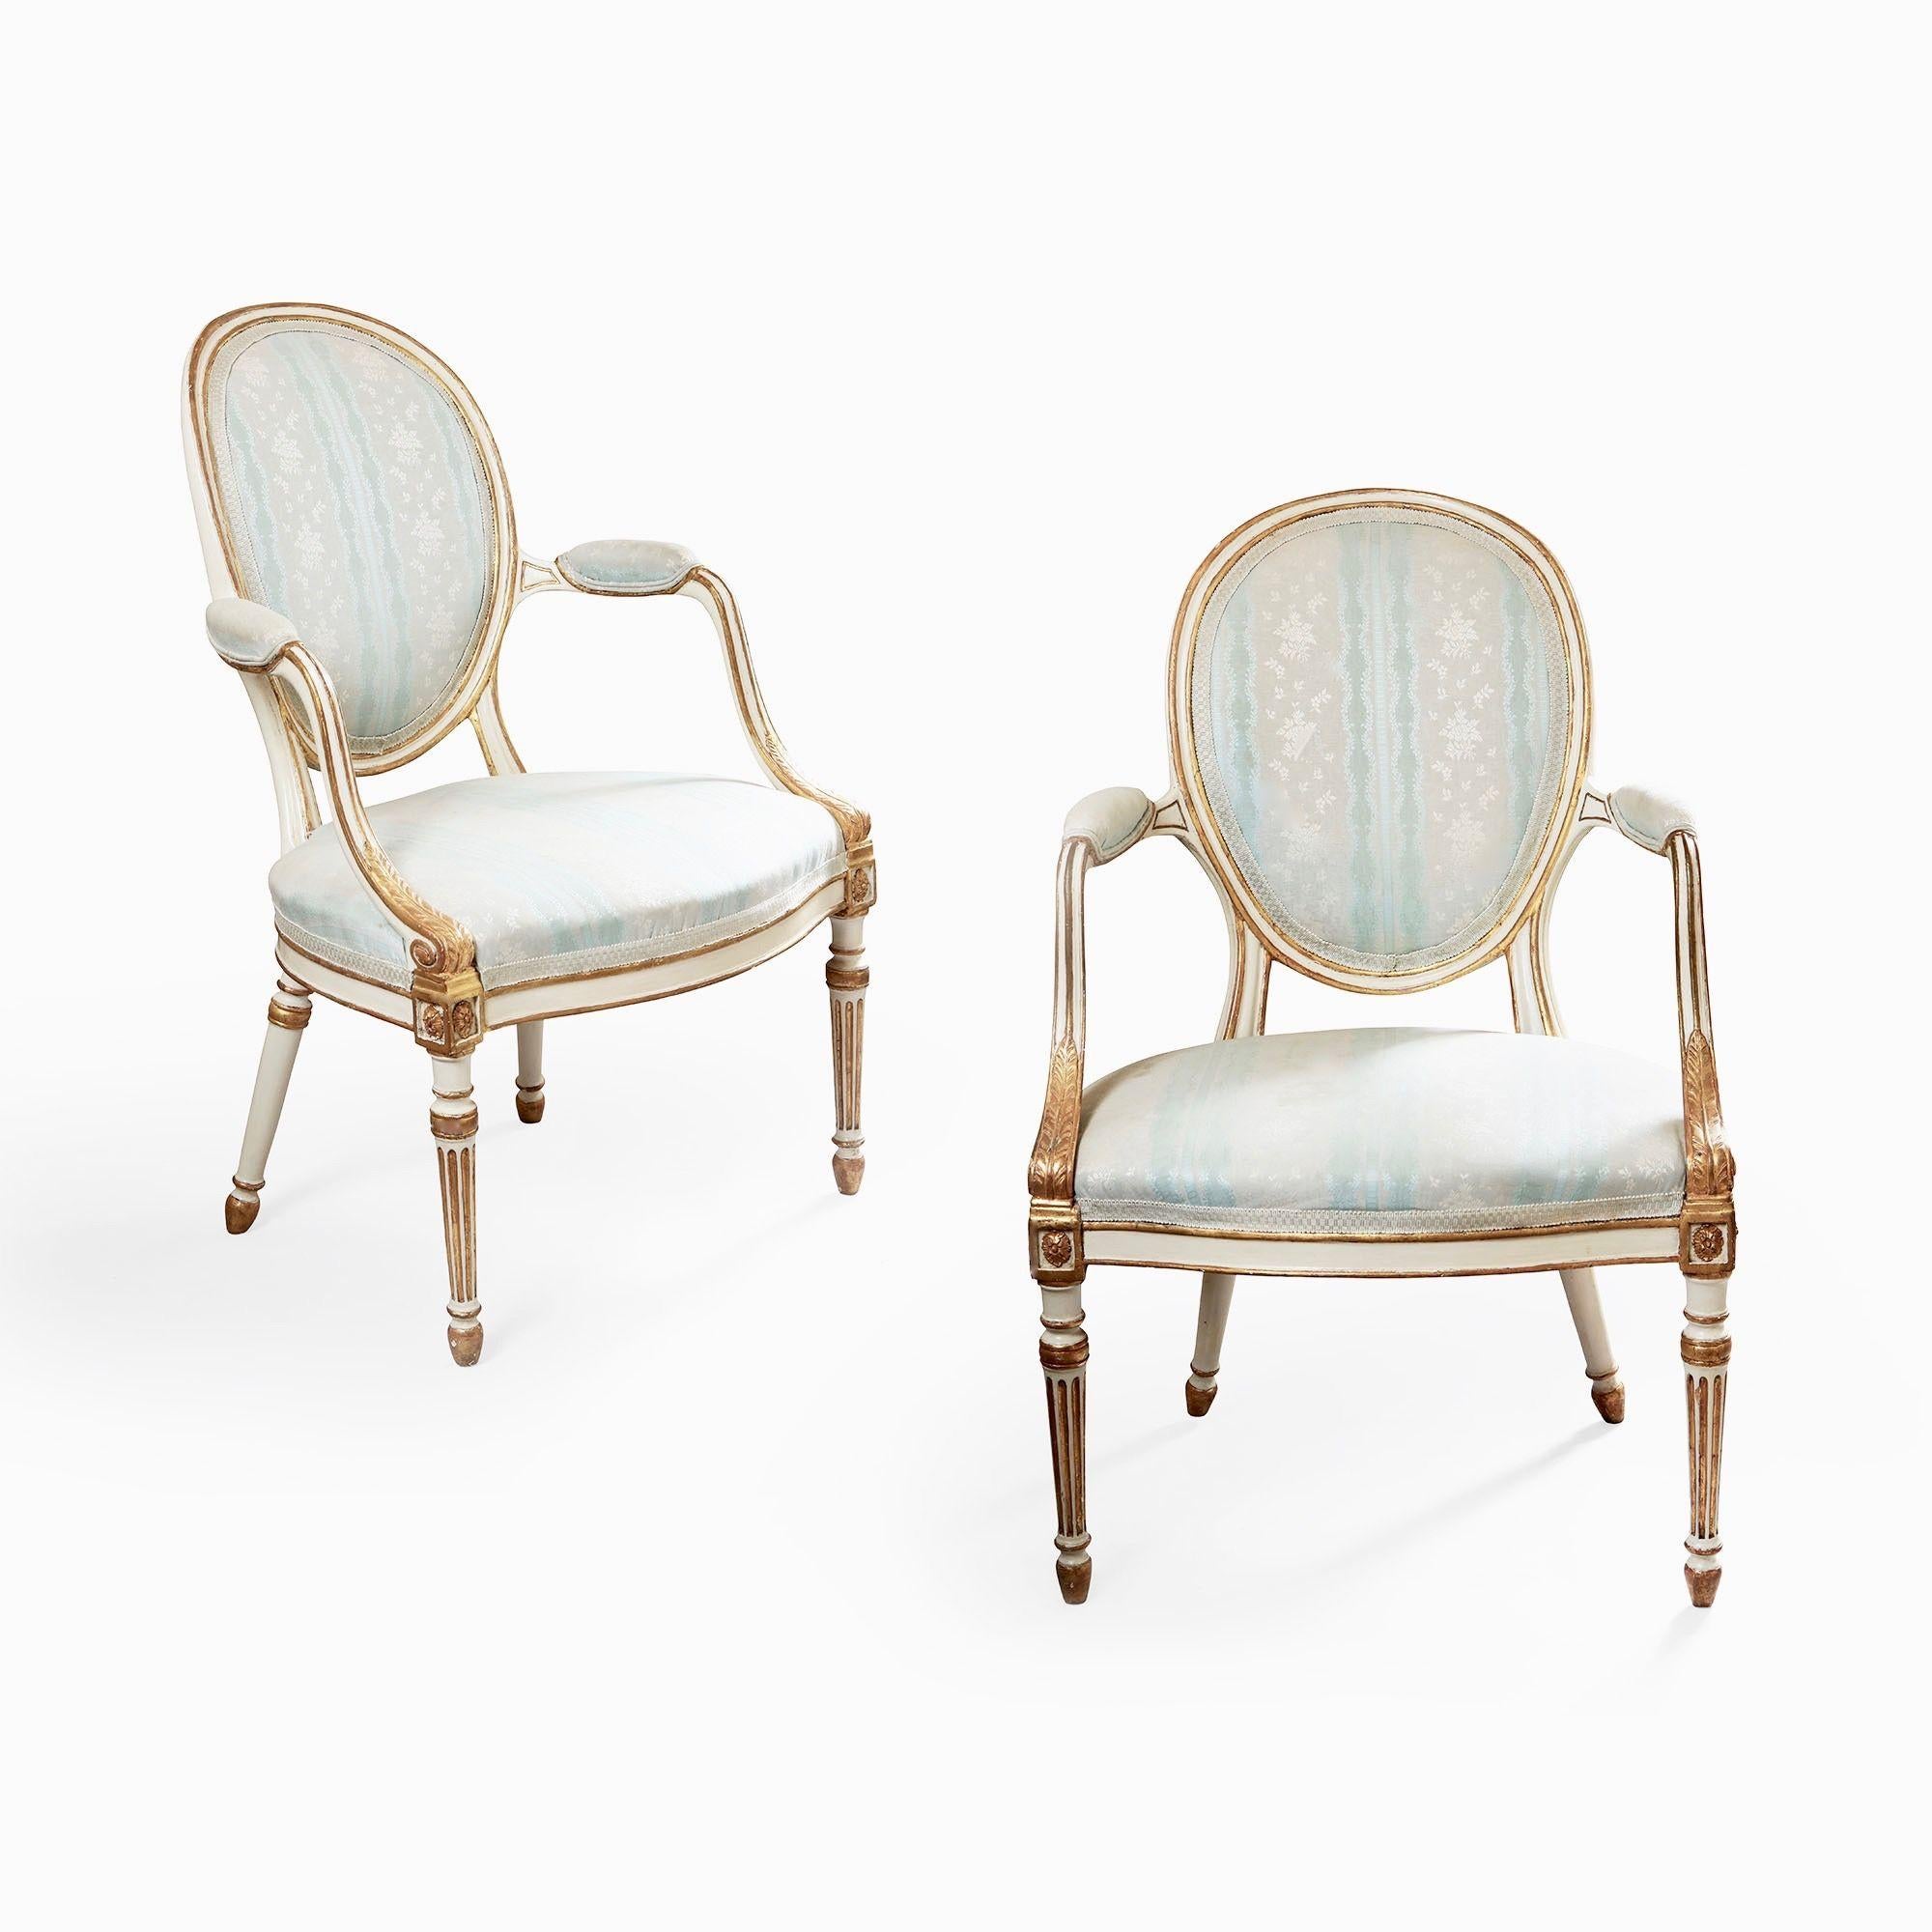 English George III Parcel Gilt Painted Pair of Chairs